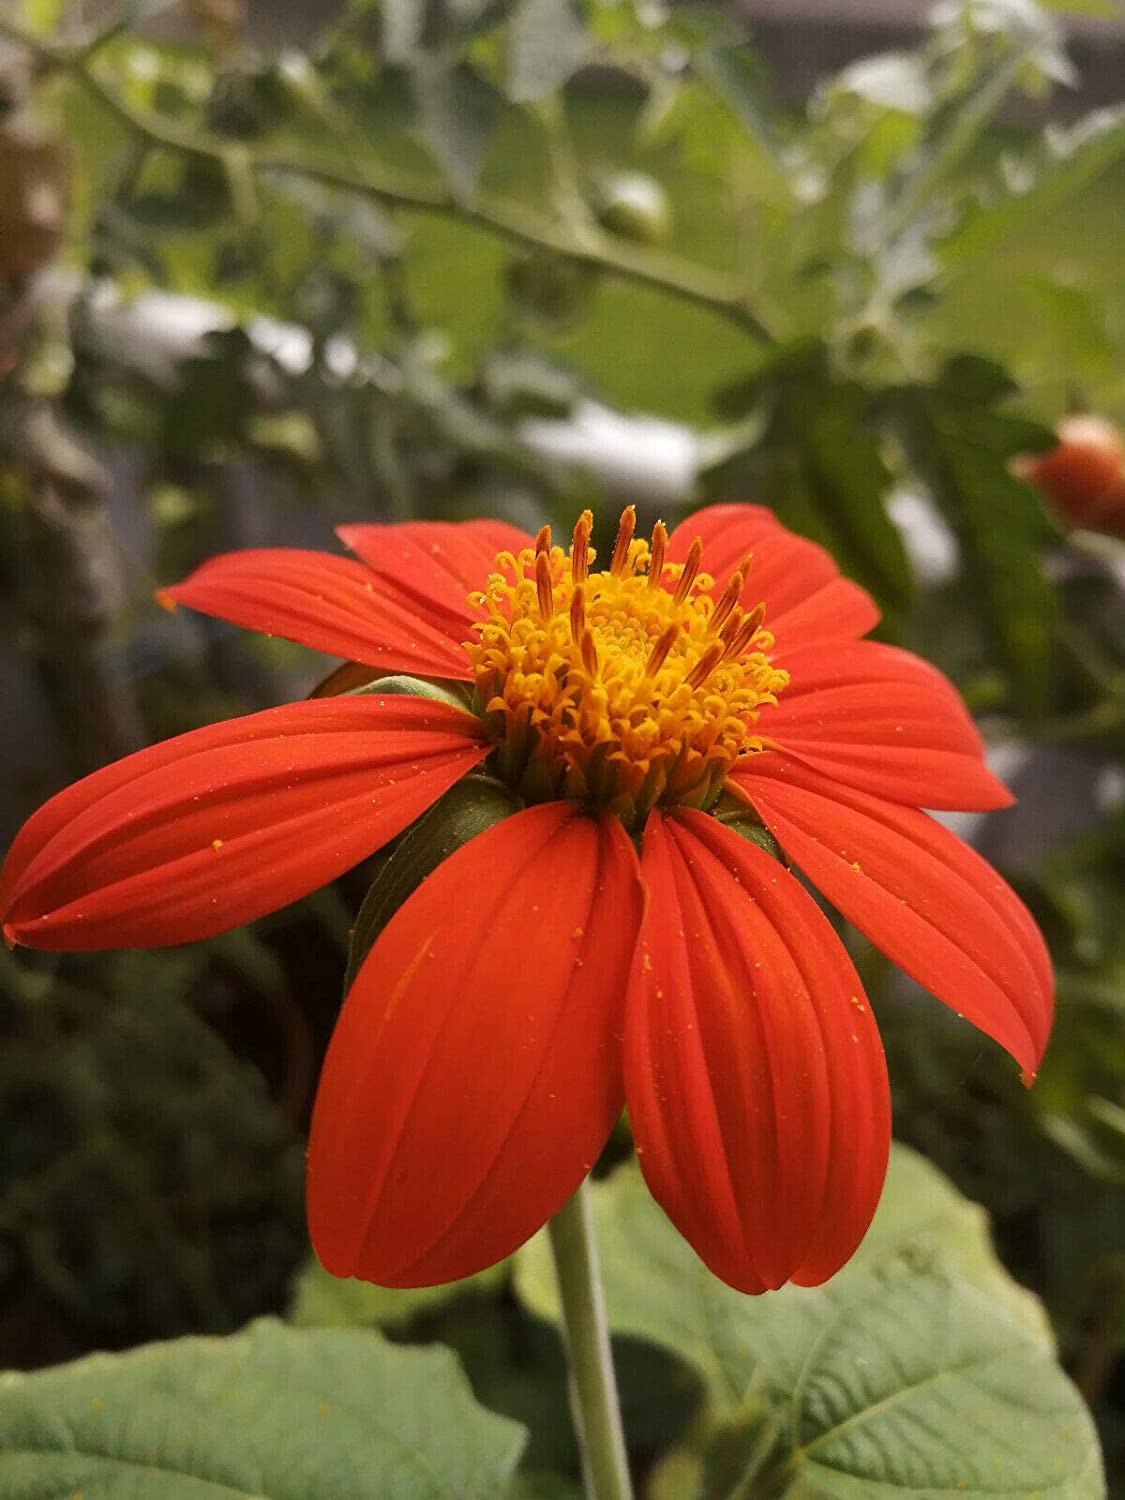 Torch Tithonia 50 Flower Seeds - Tithonia rotundifolia, Mexican Sunflower for Bees, Butterflies and Hummingbirds, Flower Bed, Border & Container